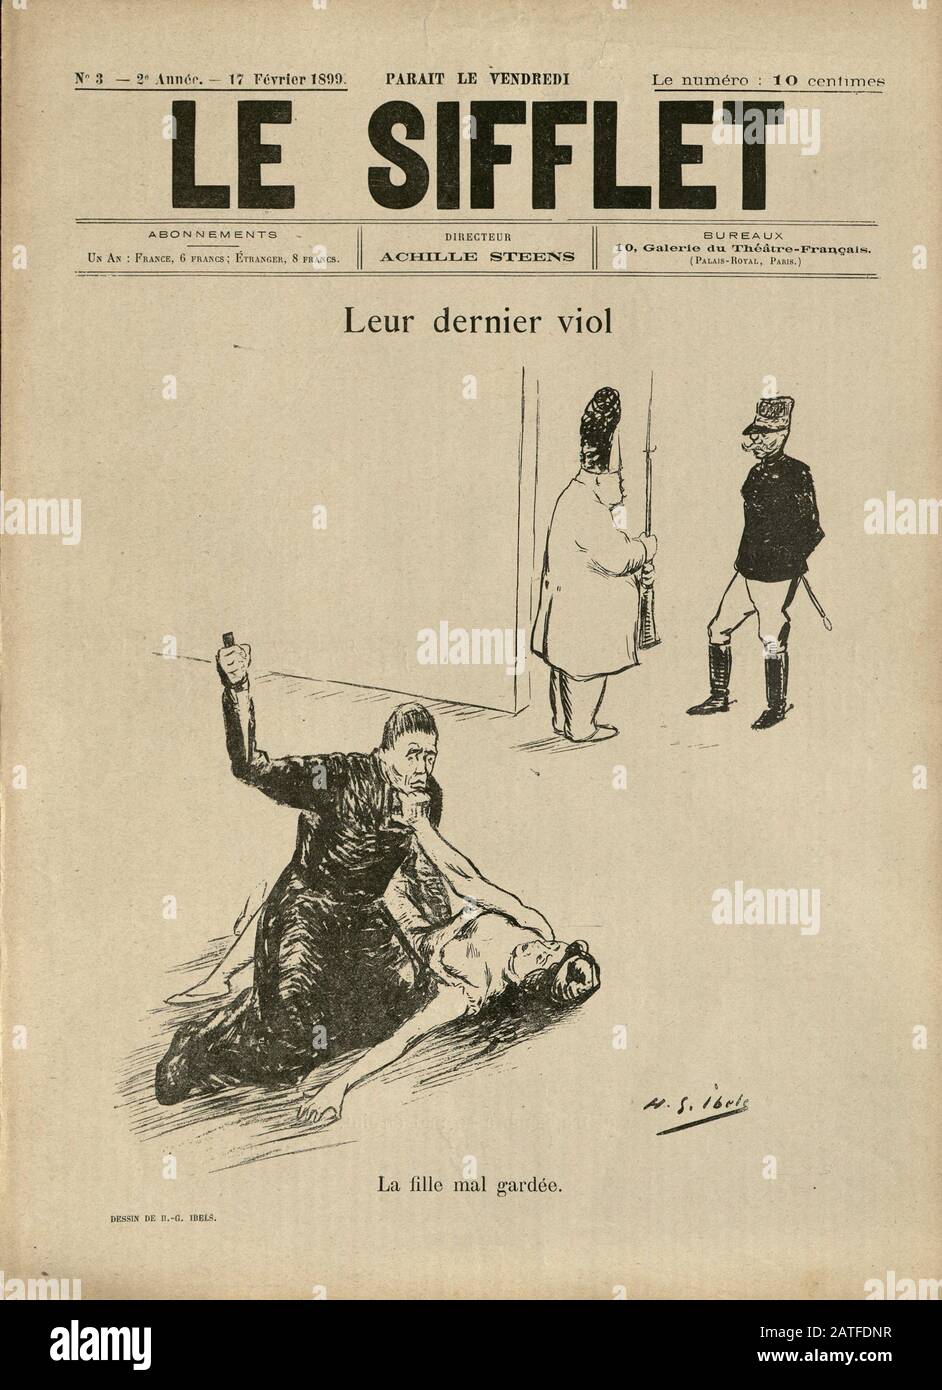 The Dreyfus Affair 1894-1906 - Le Sifflet, February 17, 1899 -  French illustrated newspaper Stock Photo